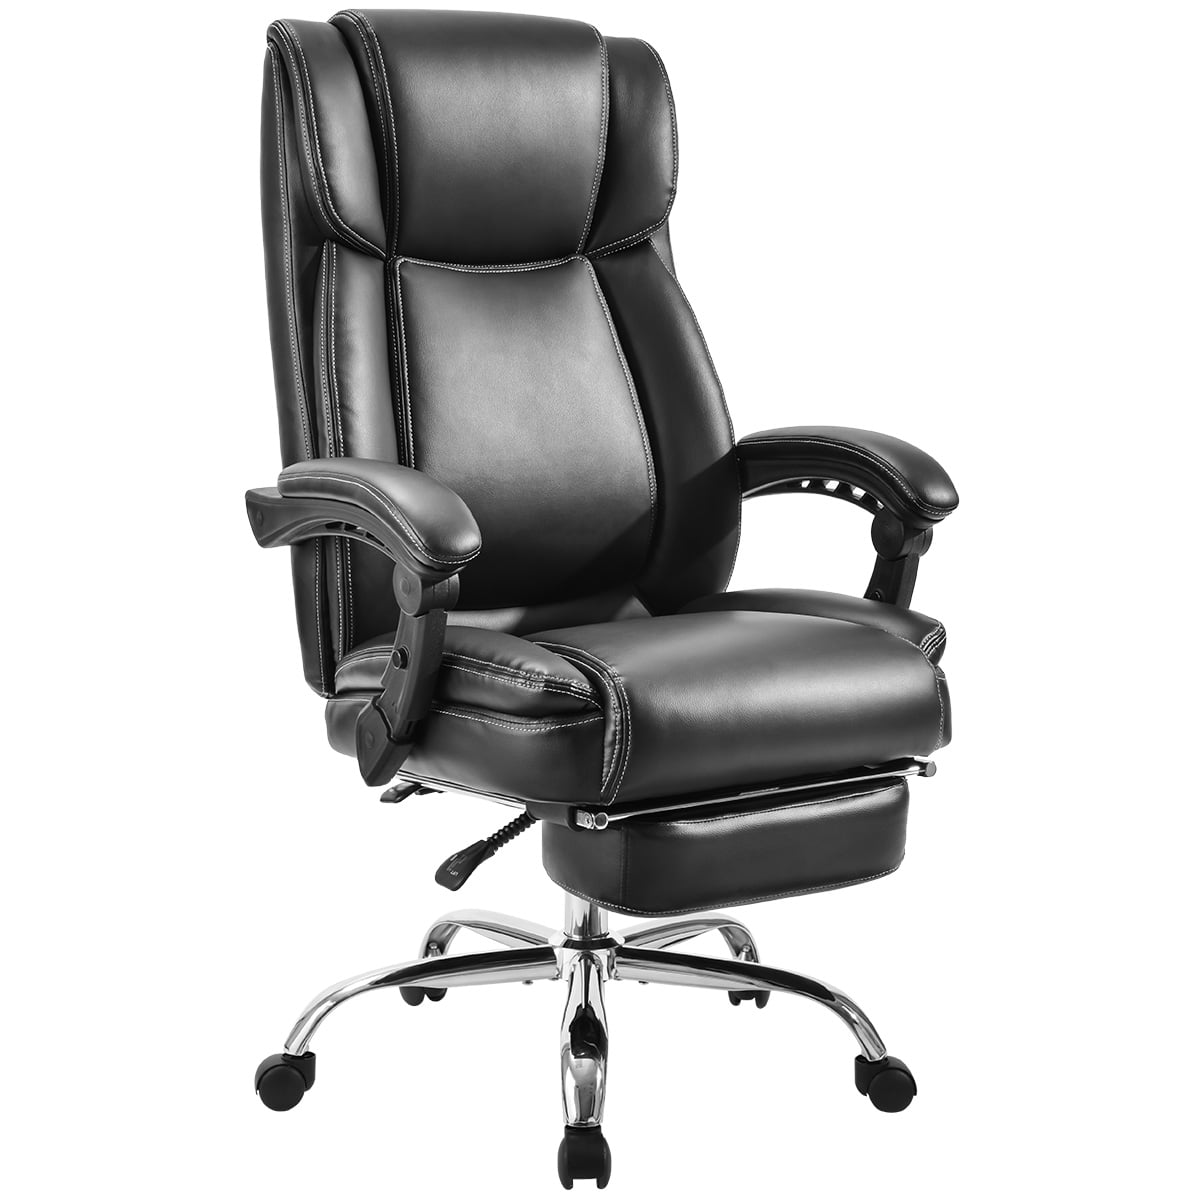 Details about   Gaming Chair Leather Upholstery Space Black Office Furniture Swivel Caster Seat 